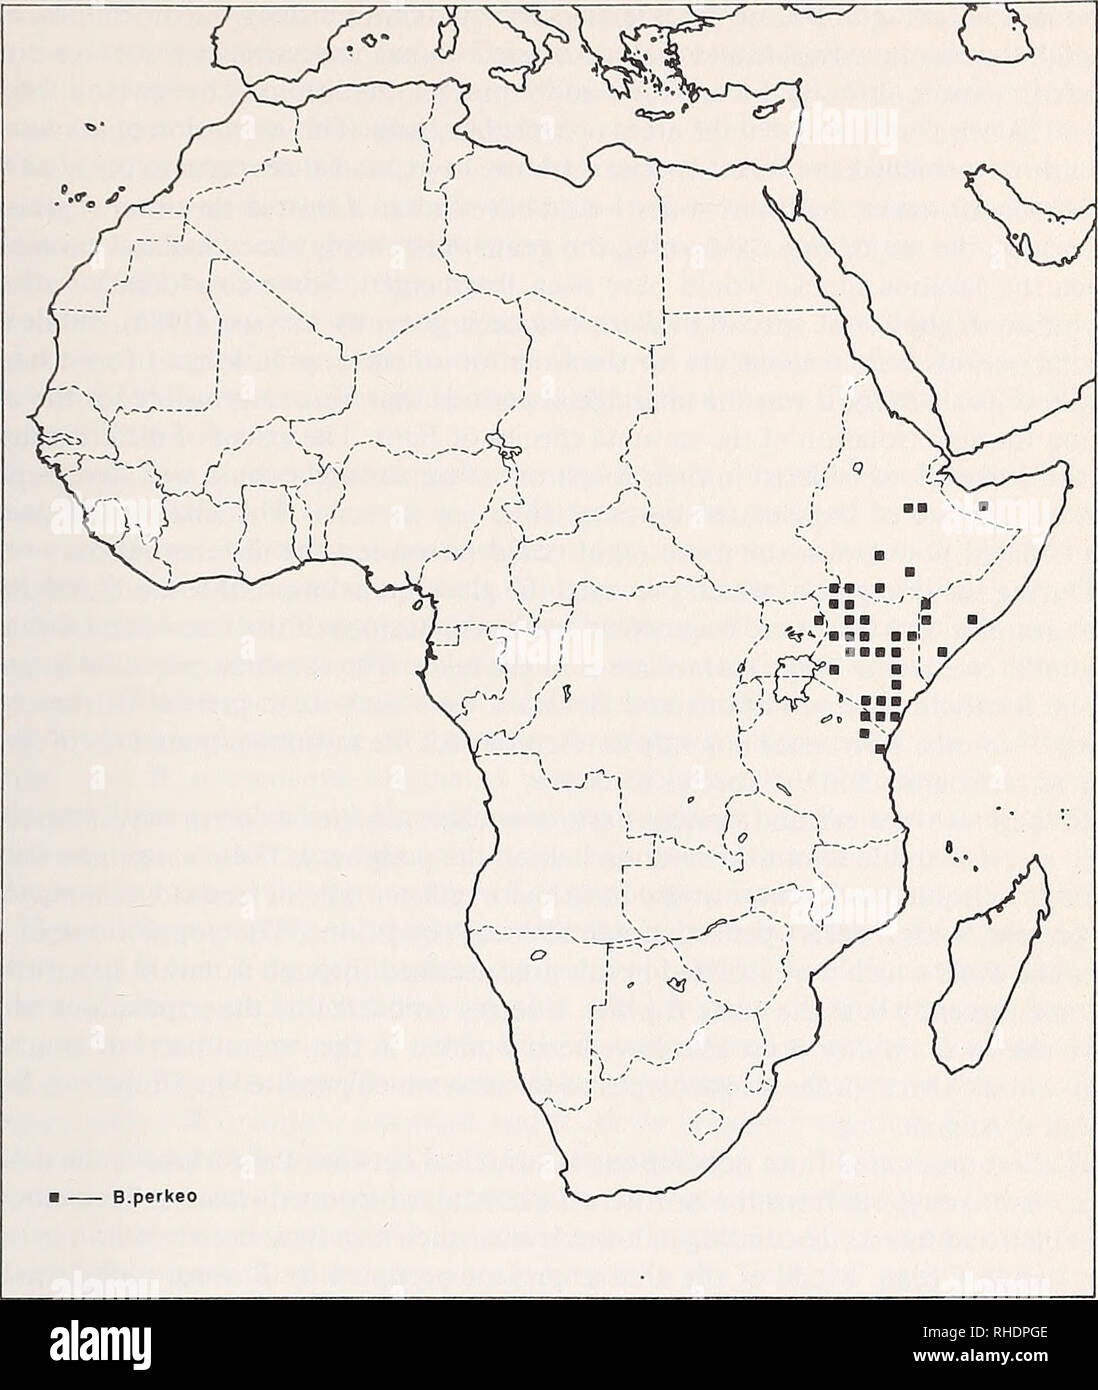 . Bonner zoologische Beiträge : Herausgeber: Zoologisches Forschungsinstitut und Museum Alexander Koenig, Bonn. Biology; Zoology. The savanna species of Batís 41. Fig. 6: Range of populations of Batis perkeo. It has been reasonably well substantiated that a correlation exists between the gla- cial episodes in various parts of the world. Large ice sheets covered parts of the nor- thern hemisphere during the last major glacial at 18,000 B. P. Ice sheets were not for- med on the African continent though there were substantial enlargements of the gla- ciers on many of the high mountains in Africa. Stock Photo